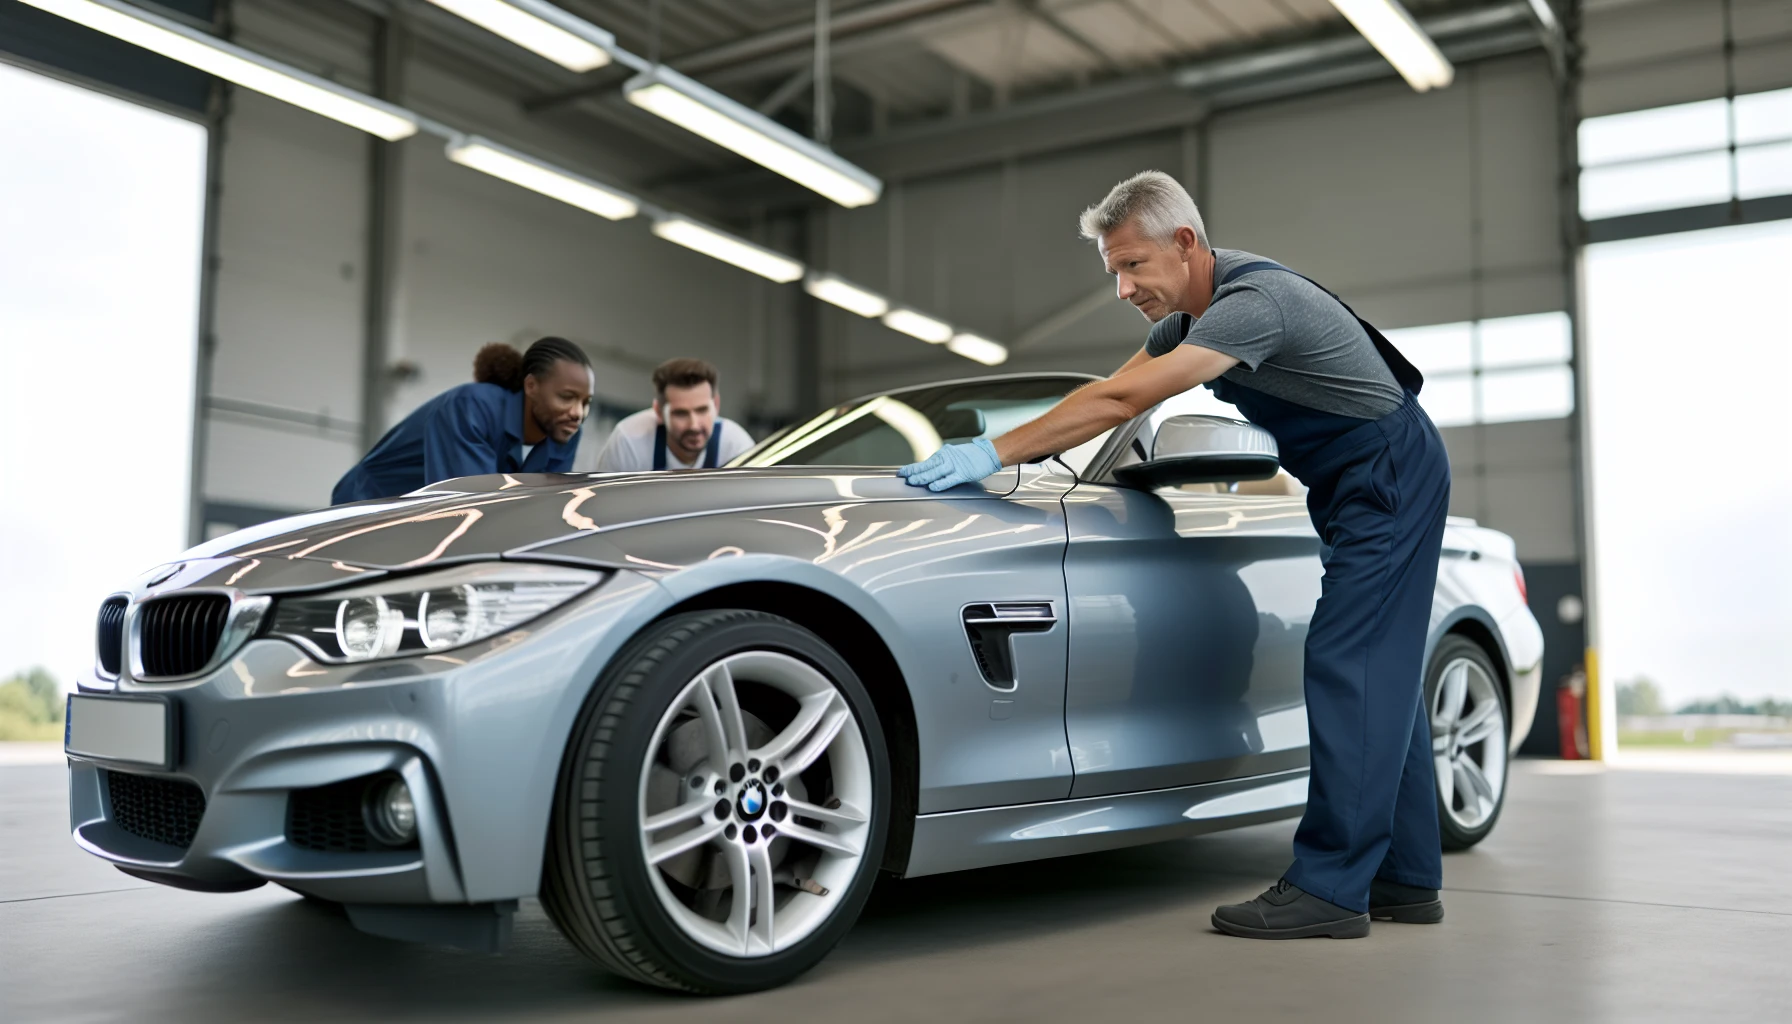 Inspecting the exterior of a used BMW convertible